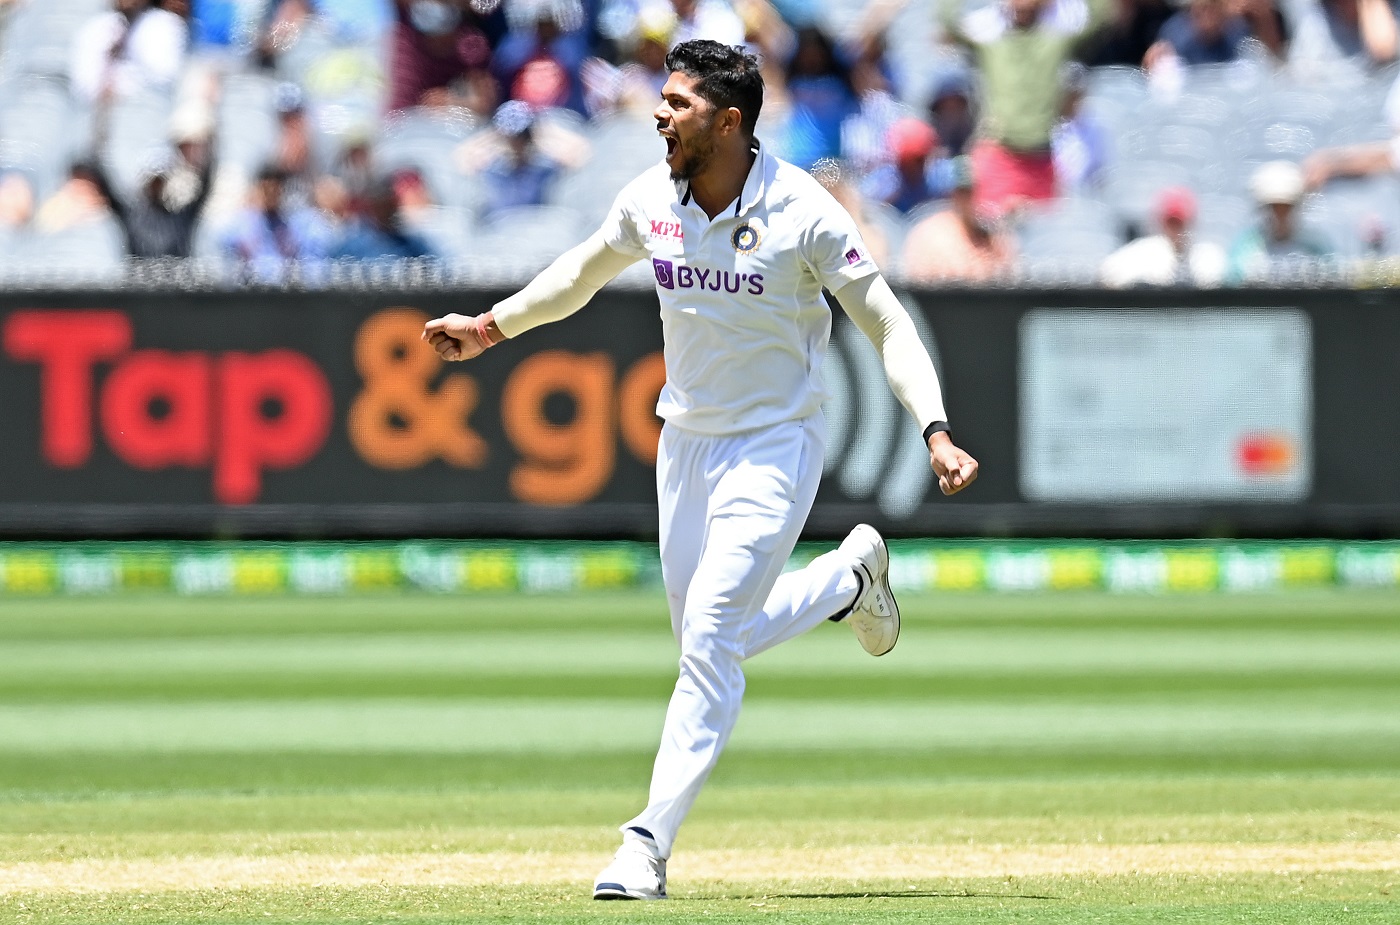 IND vs NZ Live: Umesh Yadav declares, ‘Slower delivery will get more swing on Kanpur wicket’ as India aim Test win